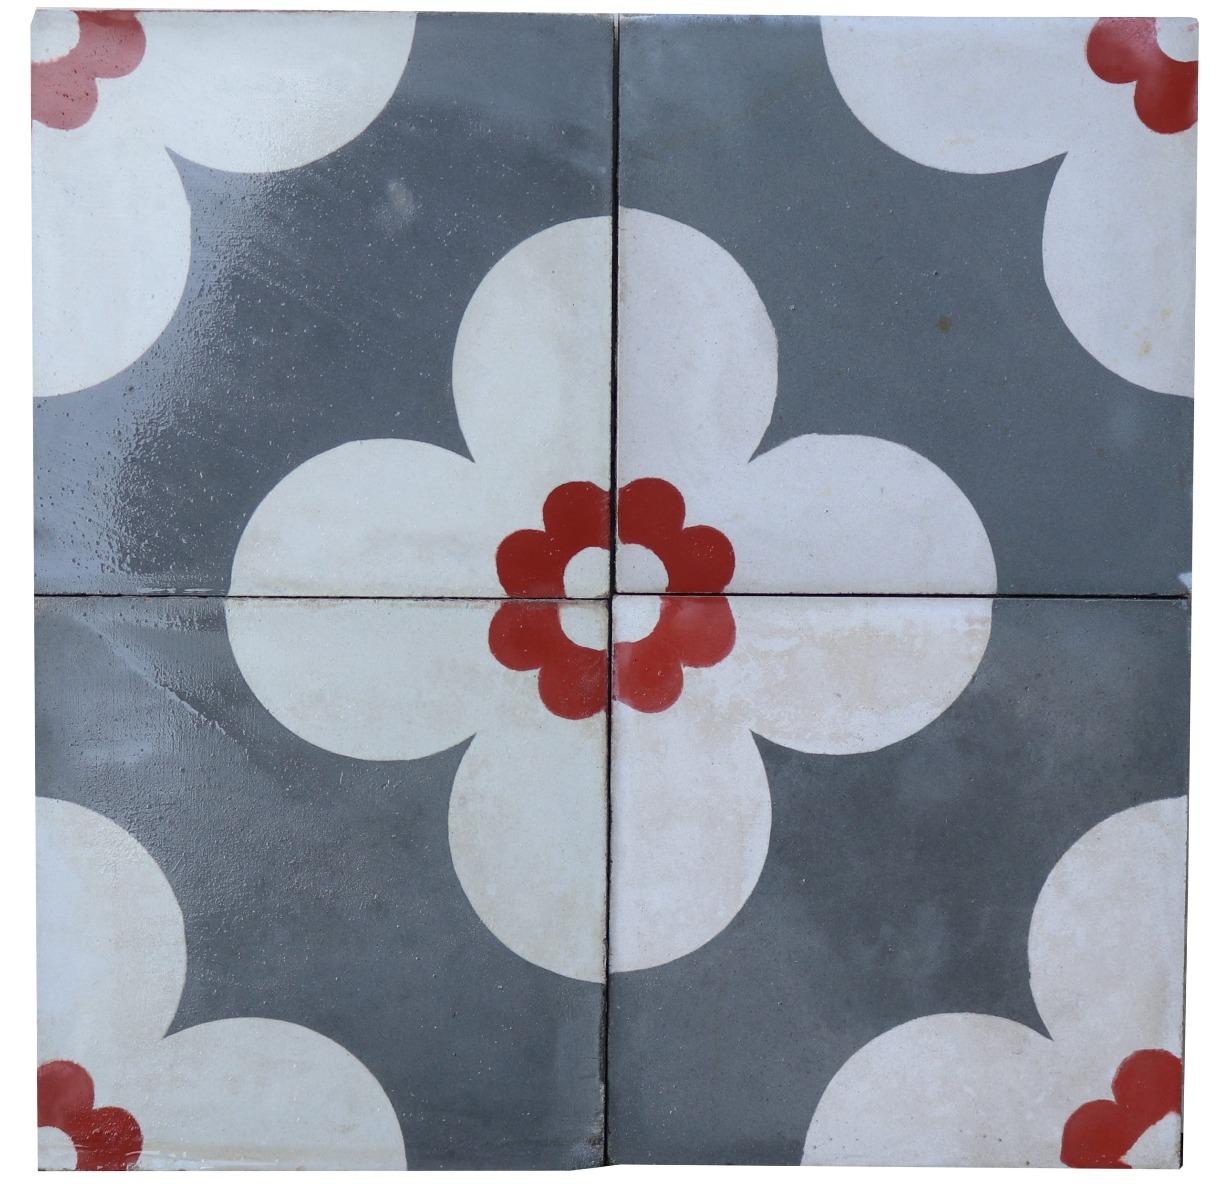 A set of 114 reclaimed encaustic cement tiles. These tiles will cover 4.56 m2 or 49 sq ft.